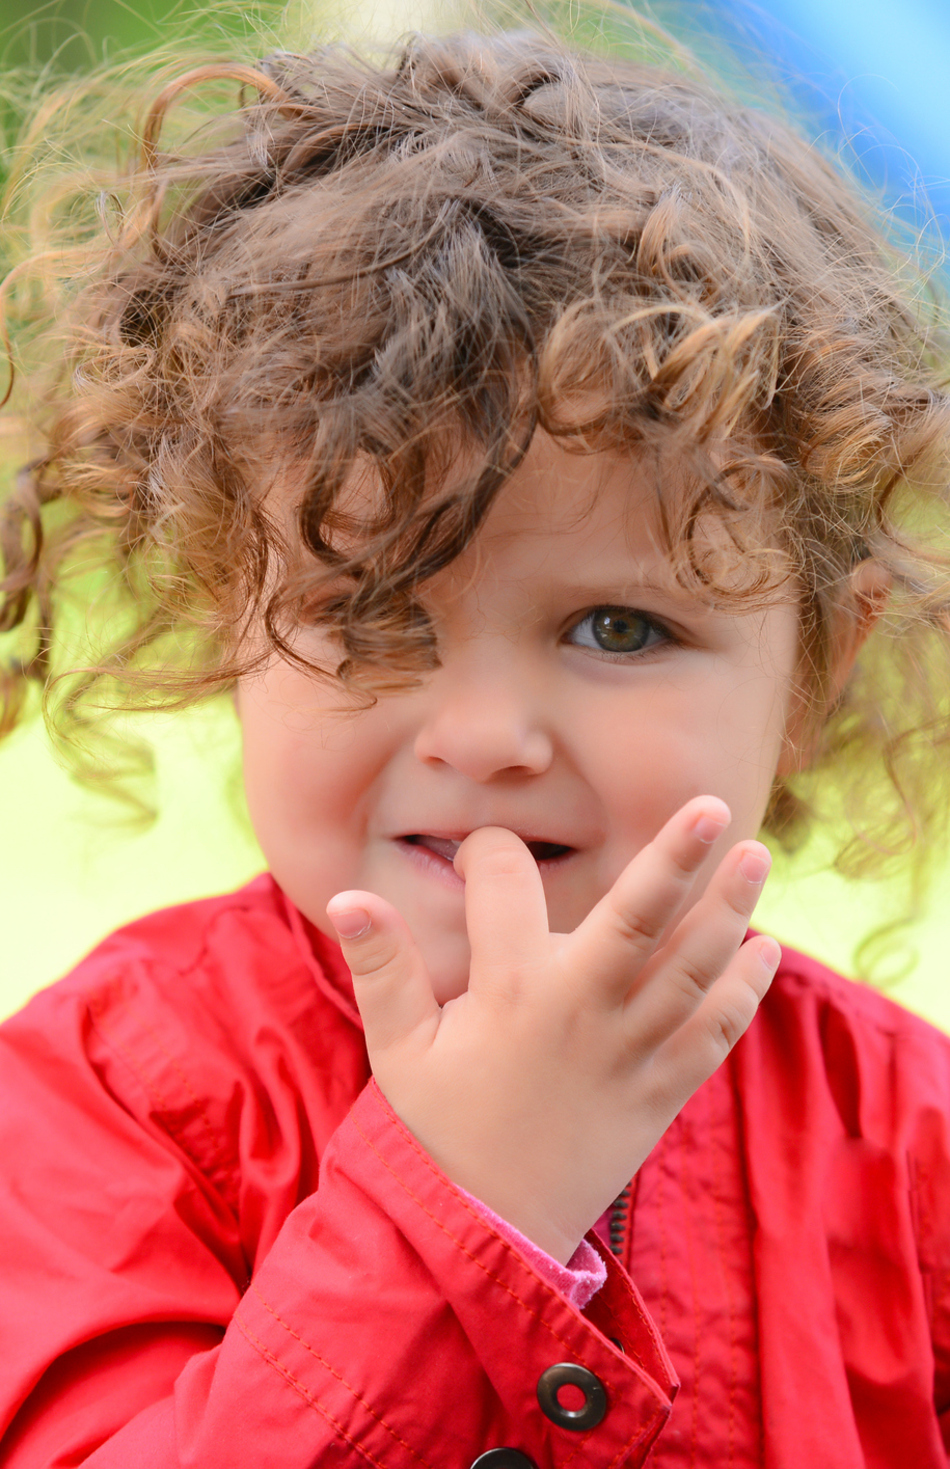 Kid Biting Nails Photos, Images and Pictures